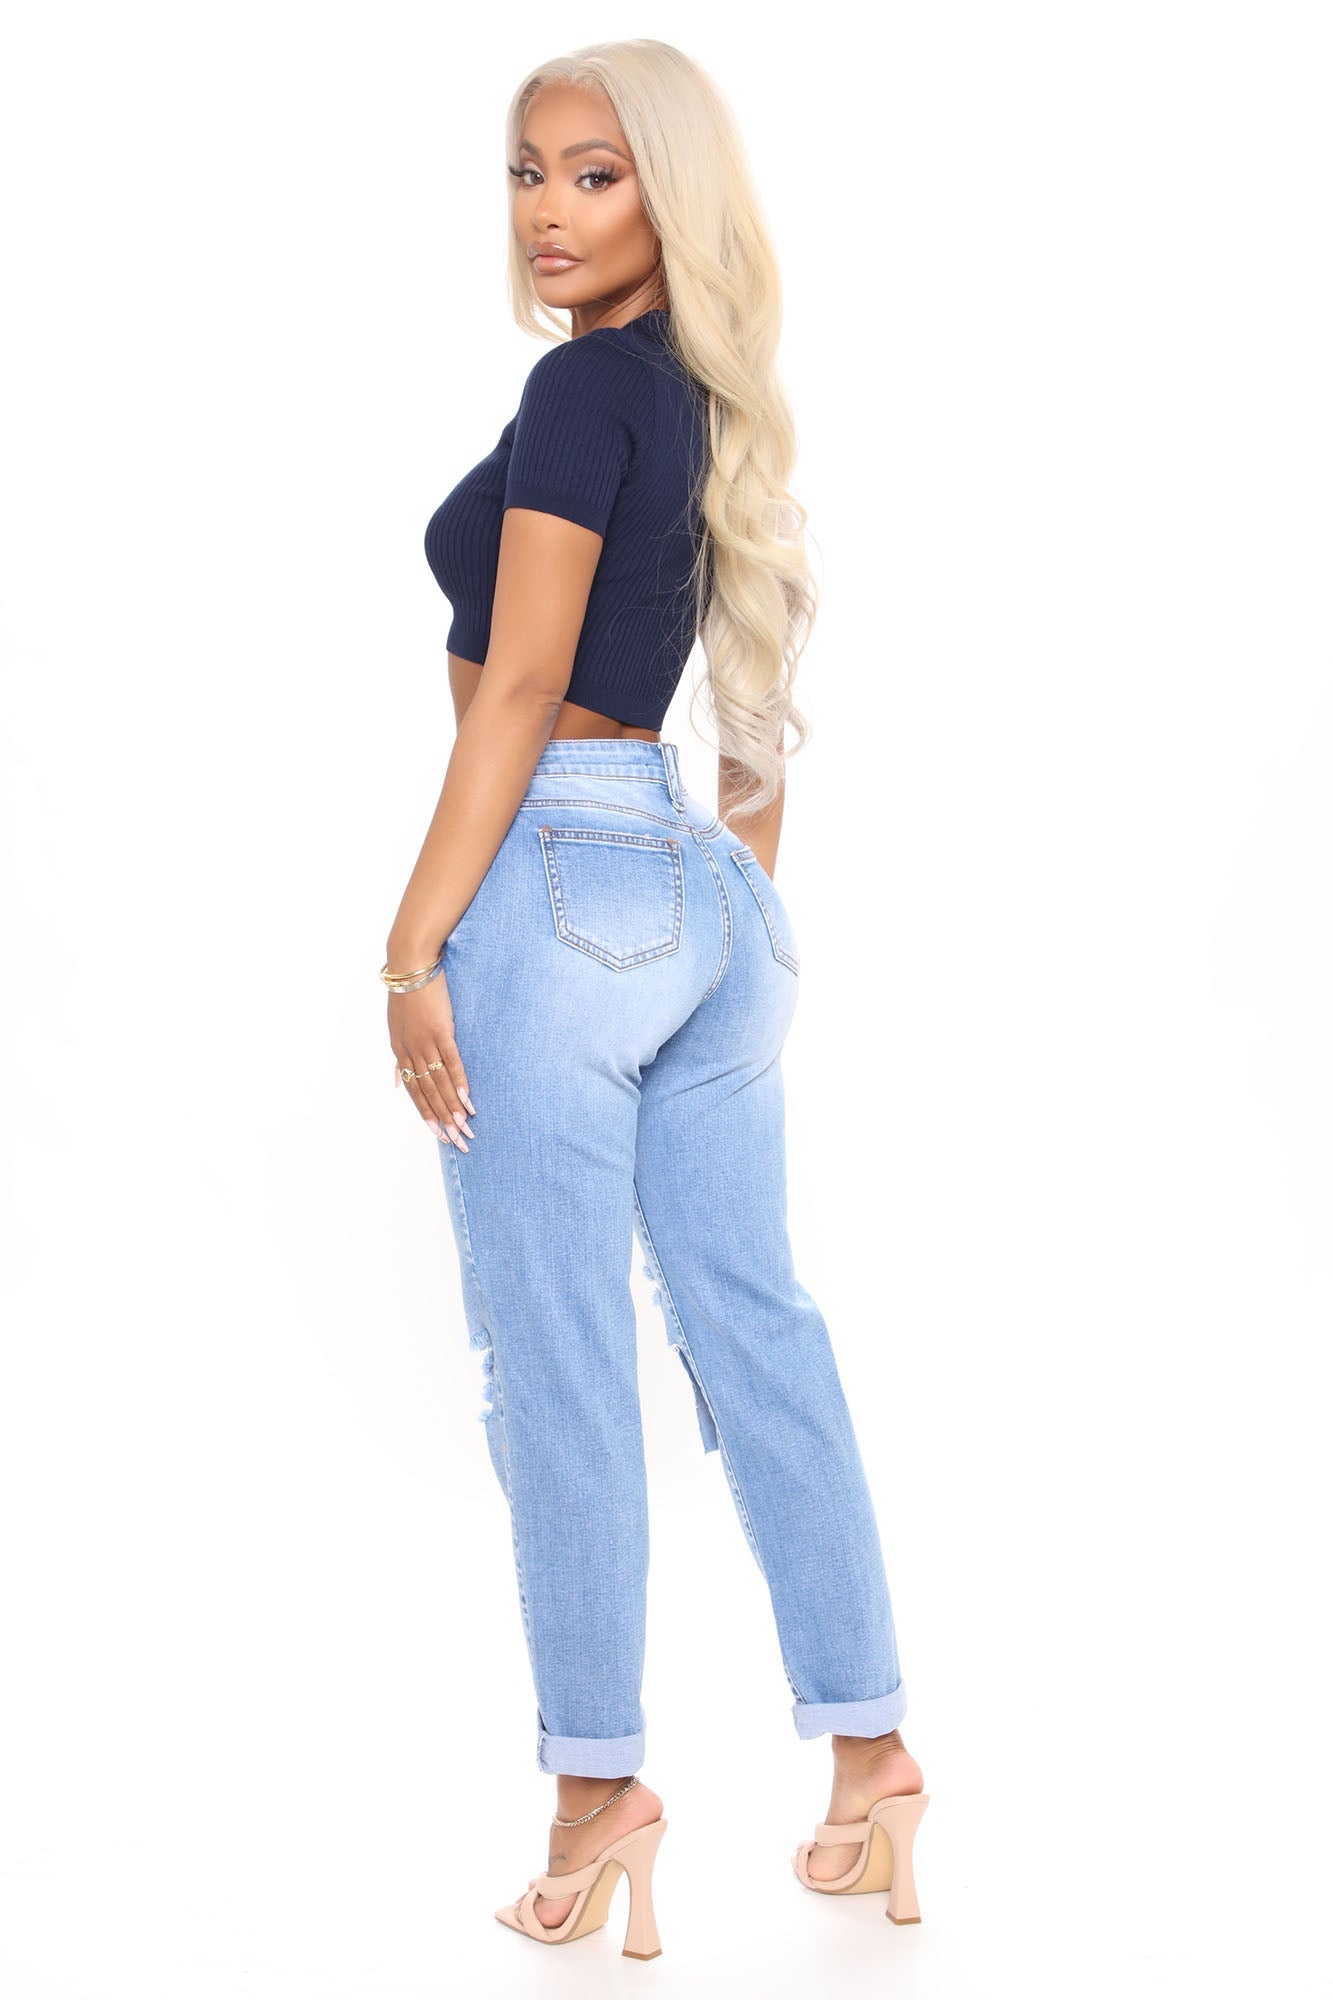 On My Own Ripped Girlfriend Jeans - Medium Blue Wash